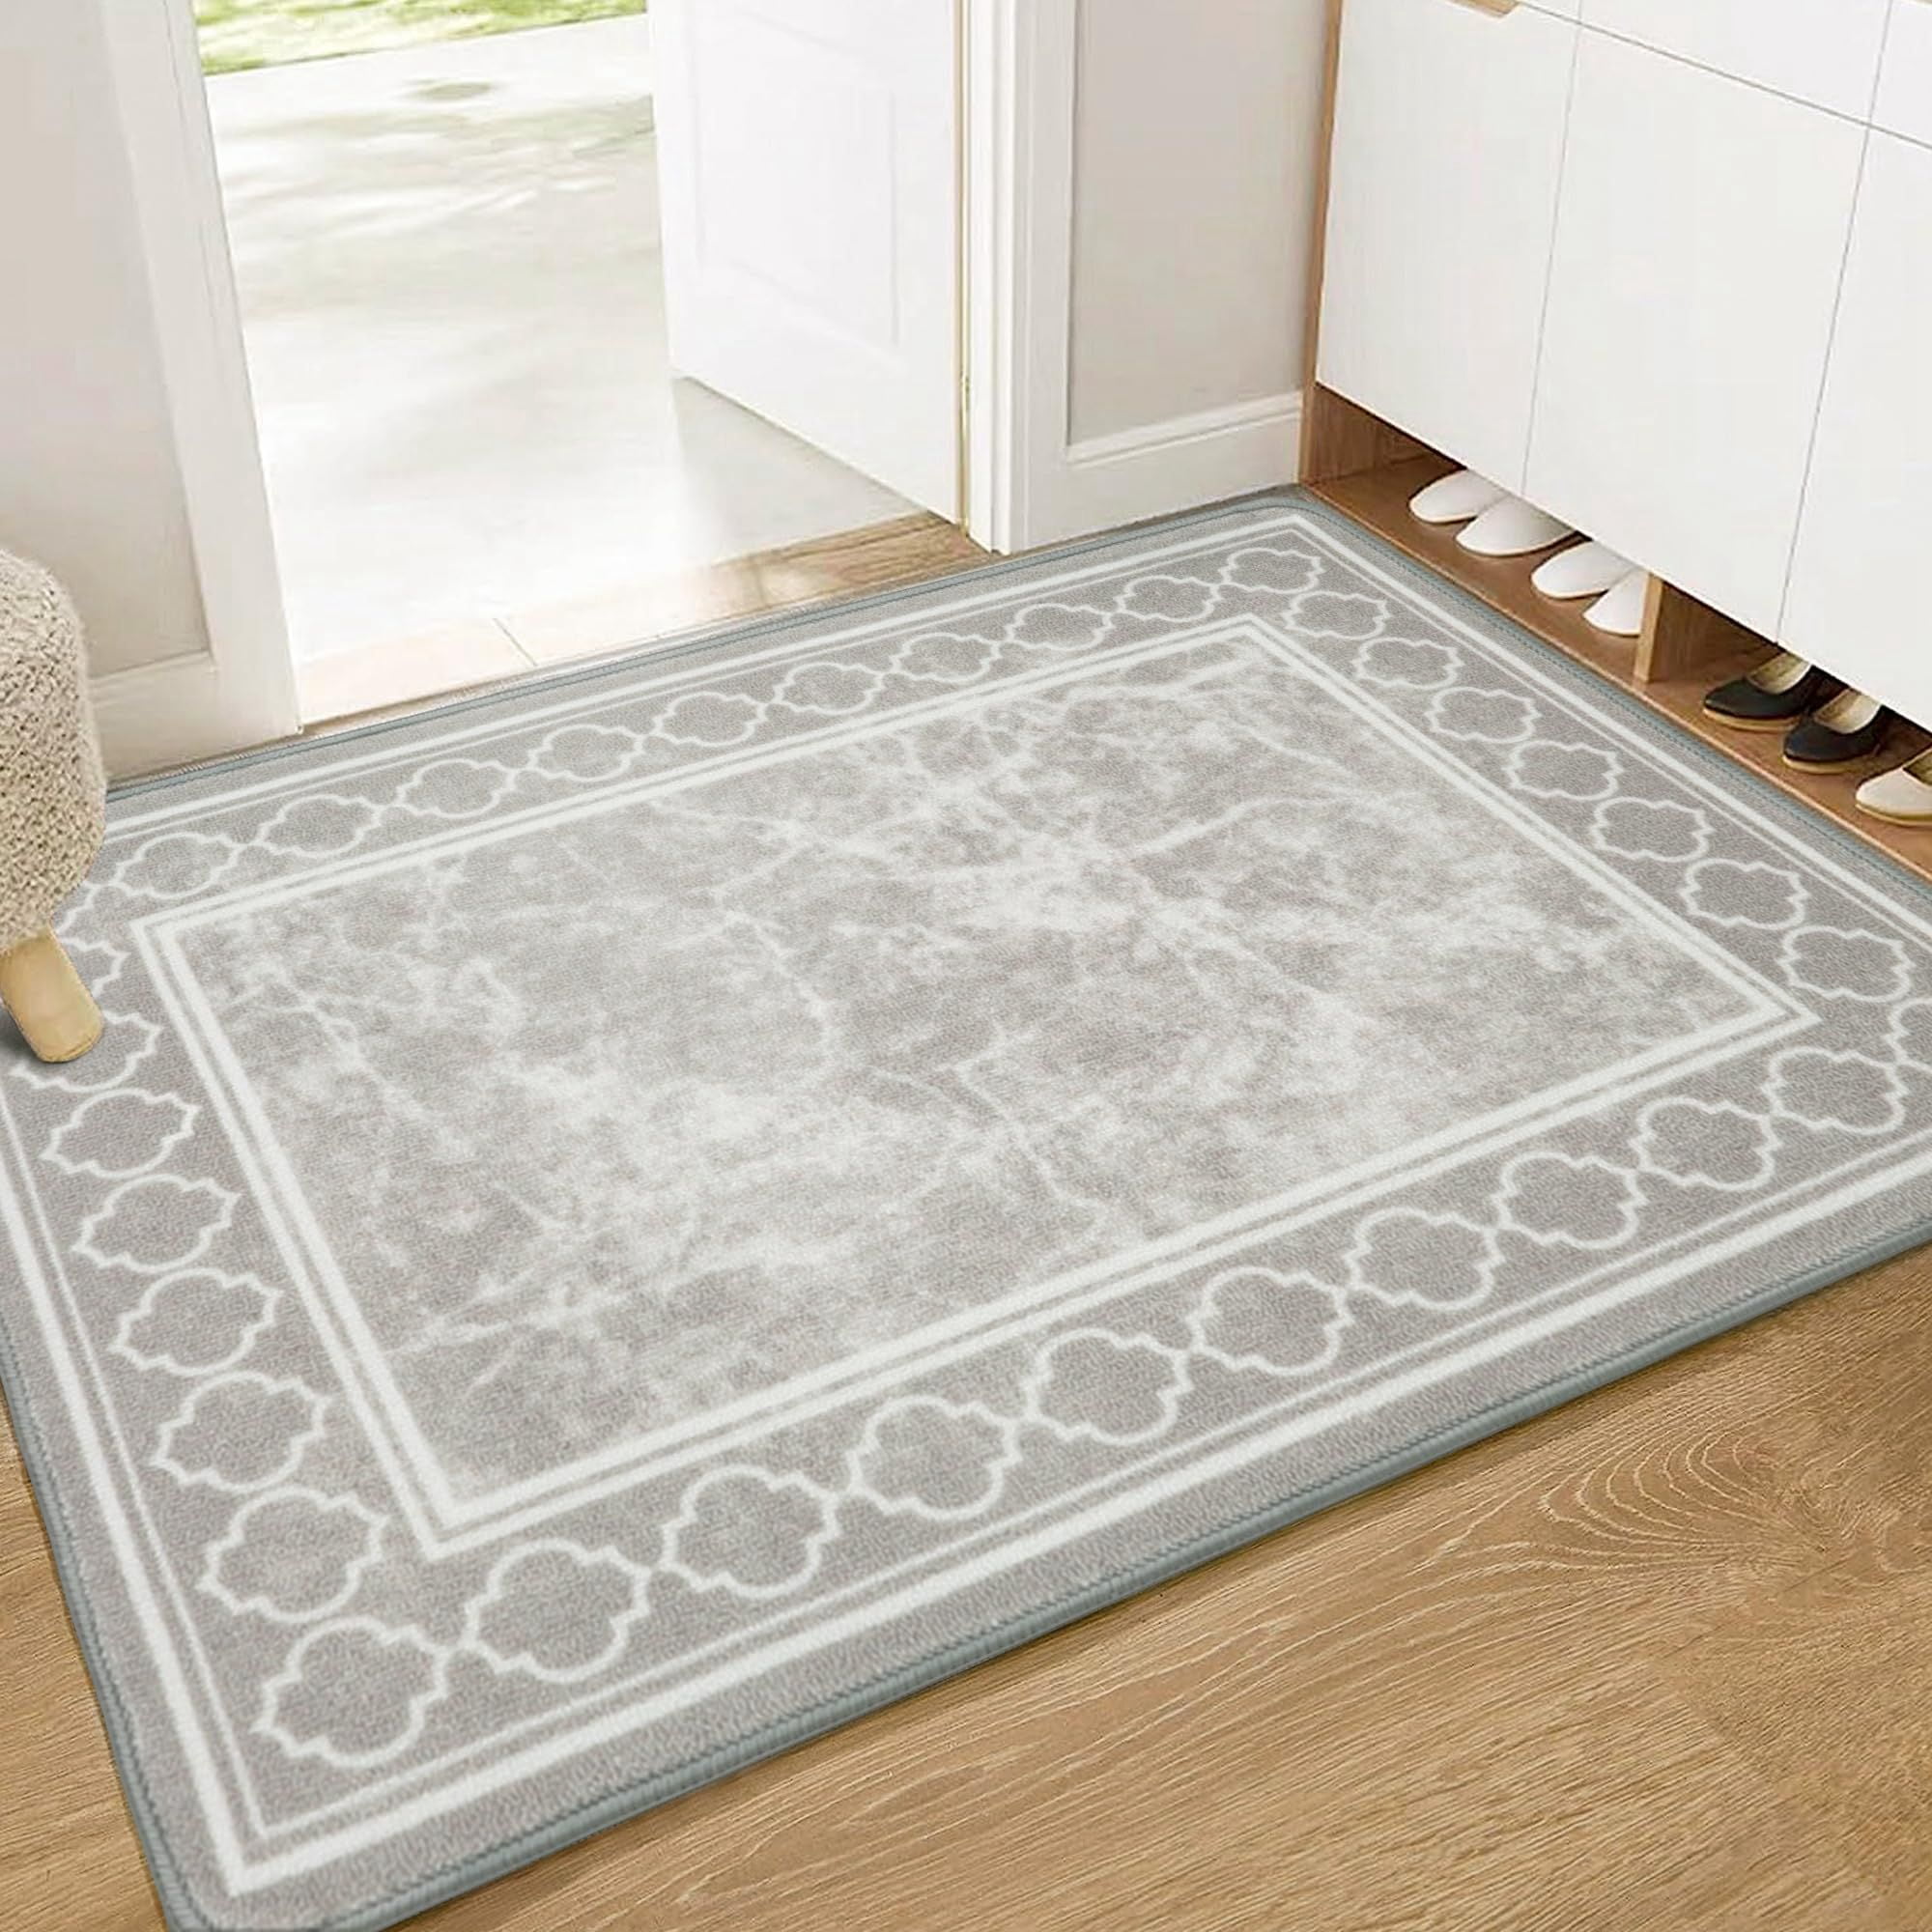 MCOW Area Rug Non Slip 2'x3' Doormat Low Pile Machine Washable Vintage  Rugs, Small Chenille Entryway Mat for Entrance, Hallway, Kitchen and  Bathroom